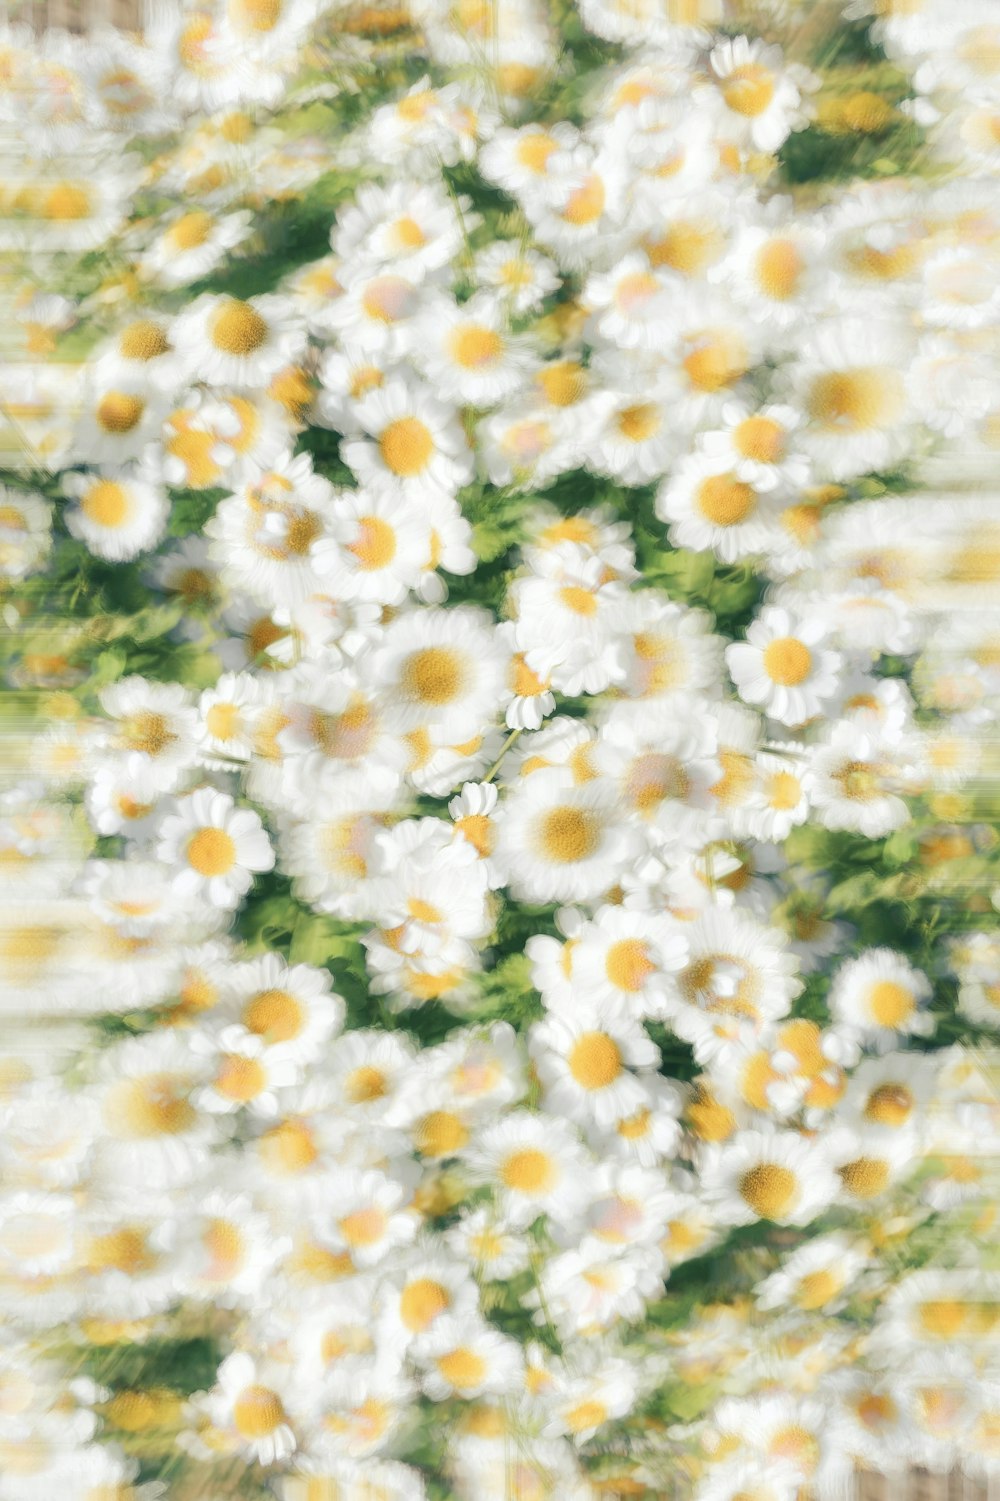 a picture of a bunch of daisies in a vase